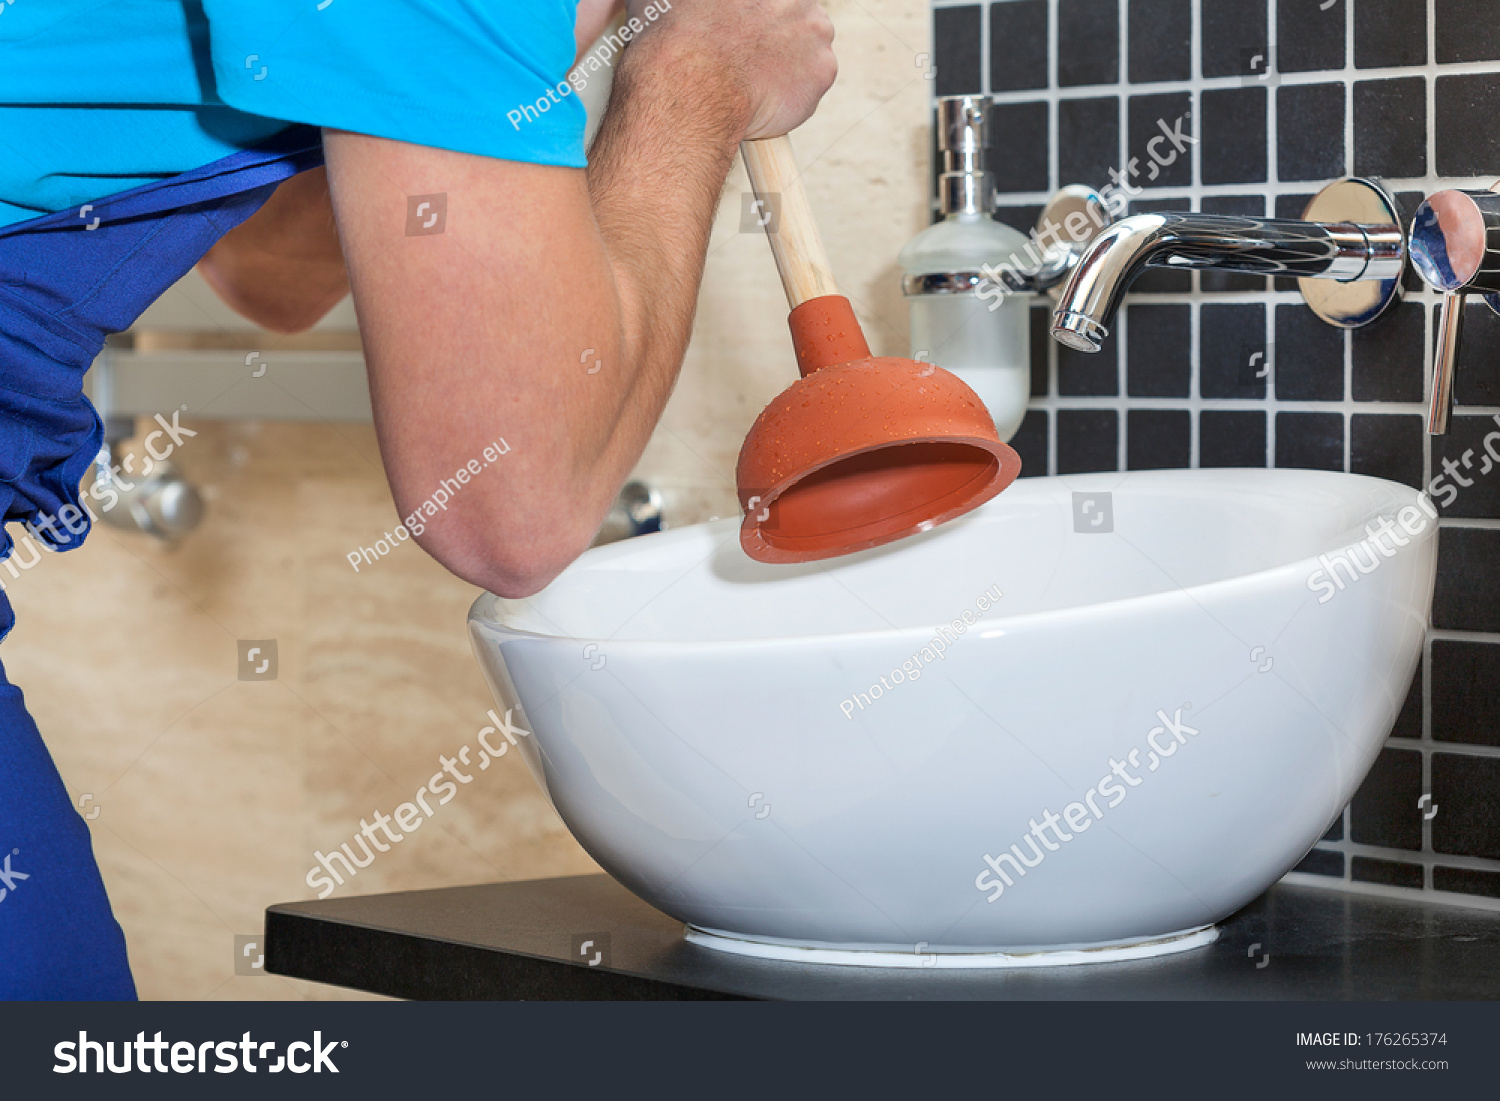 Plunging The Toilet Stock Photo - Image: 31192170